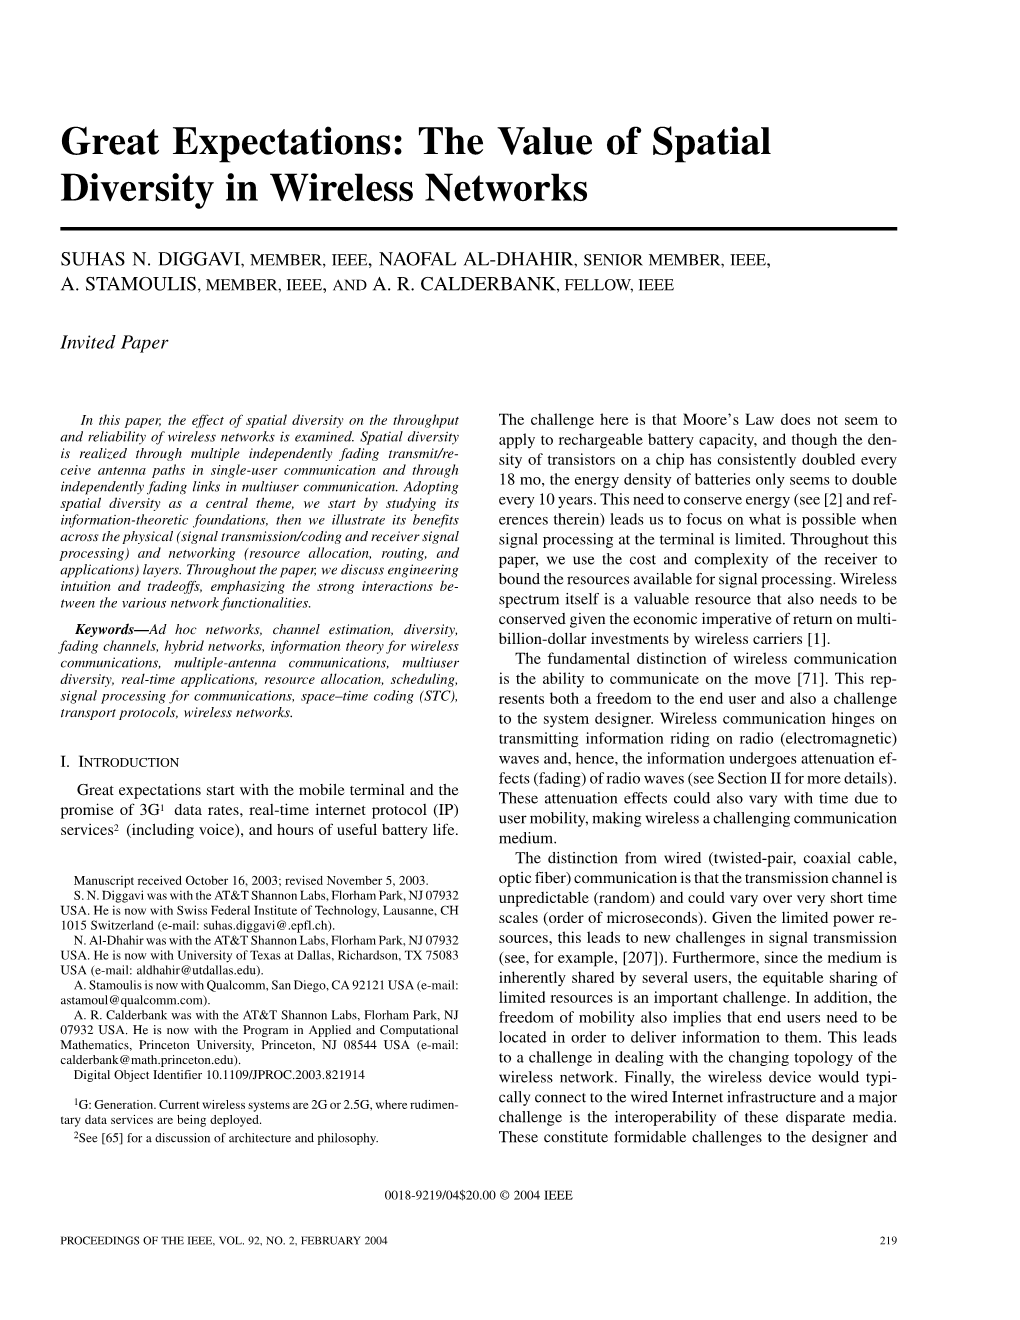 Great Expectations: the Value of Spatial Diversity in Wireless Networks